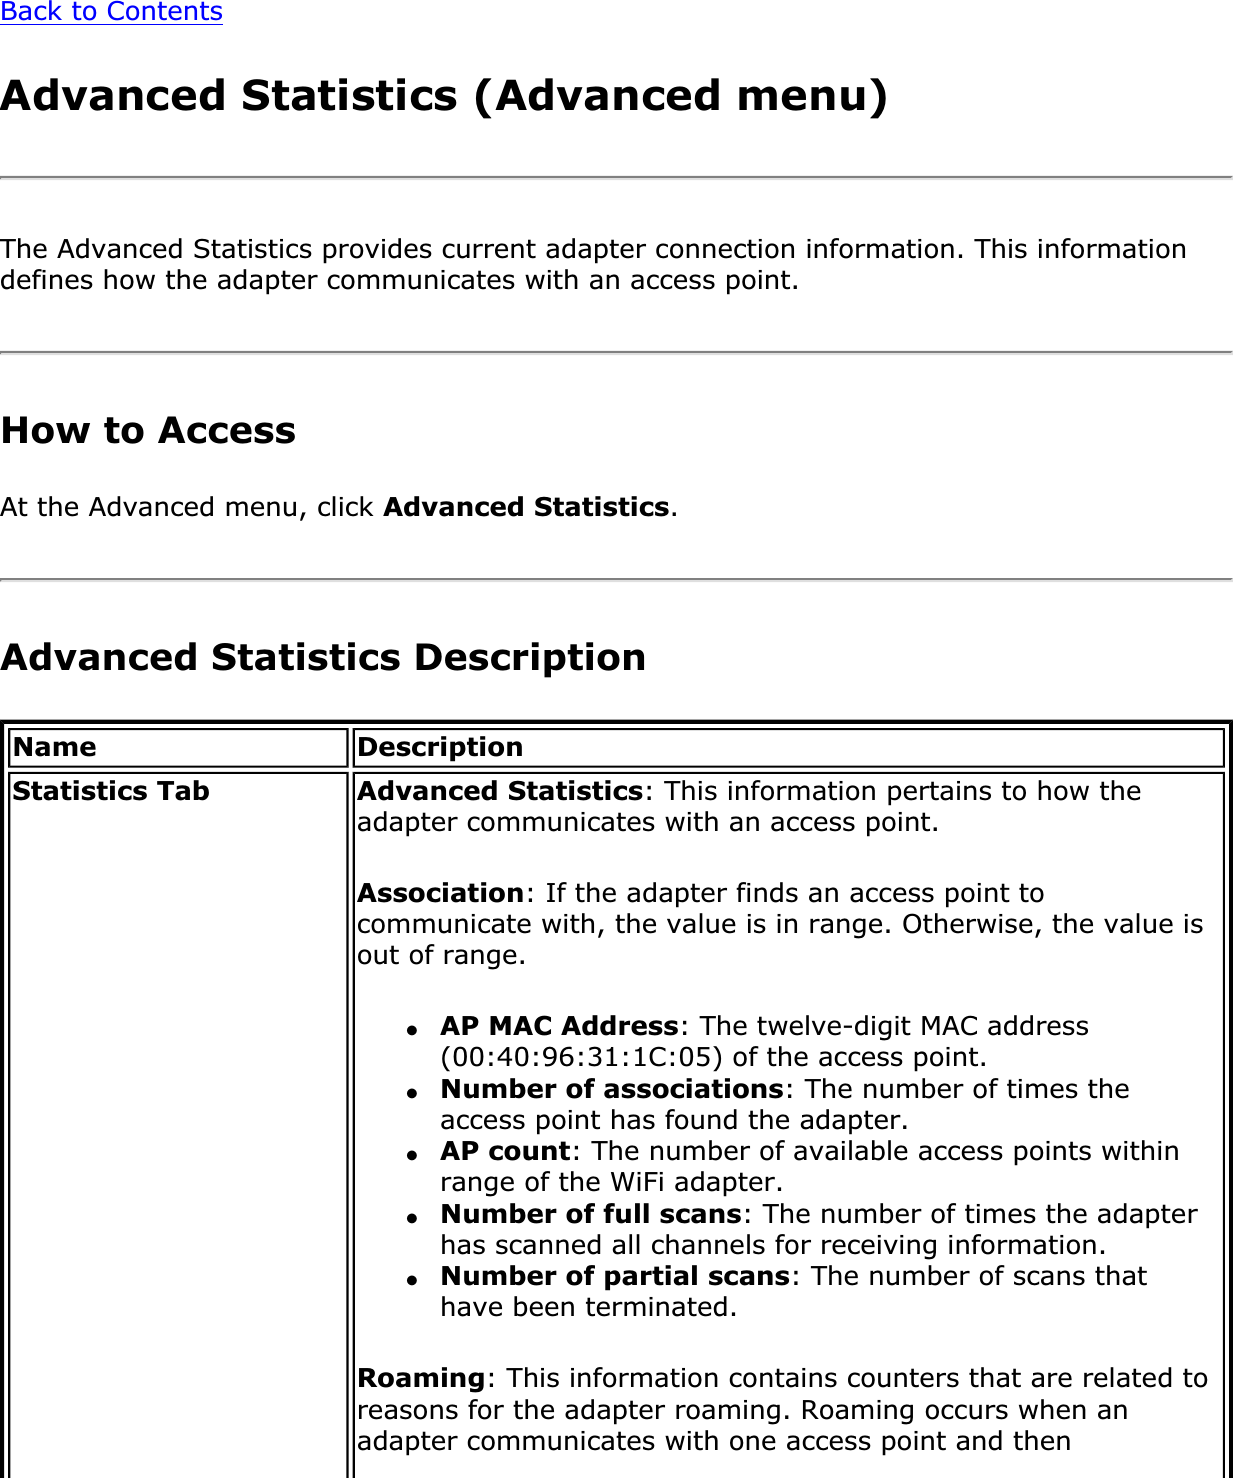 Back to ContentsAdvanced Statistics (Advanced menu)The Advanced Statistics provides current adapter connection information. This information defines how the adapter communicates with an access point. How to AccessAt the Advanced menu, click Advanced Statistics.Advanced Statistics DescriptionName DescriptionStatistics Tab Advanced Statistics: This information pertains to how the adapter communicates with an access point.Association: If the adapter finds an access point to communicate with, the value is in range. Otherwise, the value is out of range.●AP MAC Address: The twelve-digit MAC address (00:40:96:31:1C:05) of the access point.●Number of associations: The number of times the access point has found the adapter.●AP count: The number of available access points within range of the WiFi adapter.●Number of full scans: The number of times the adapter has scanned all channels for receiving information.●Number of partial scans: The number of scans that have been terminated.Roaming: This information contains counters that are related to reasons for the adapter roaming. Roaming occurs when an adapter communicates with one access point and then 